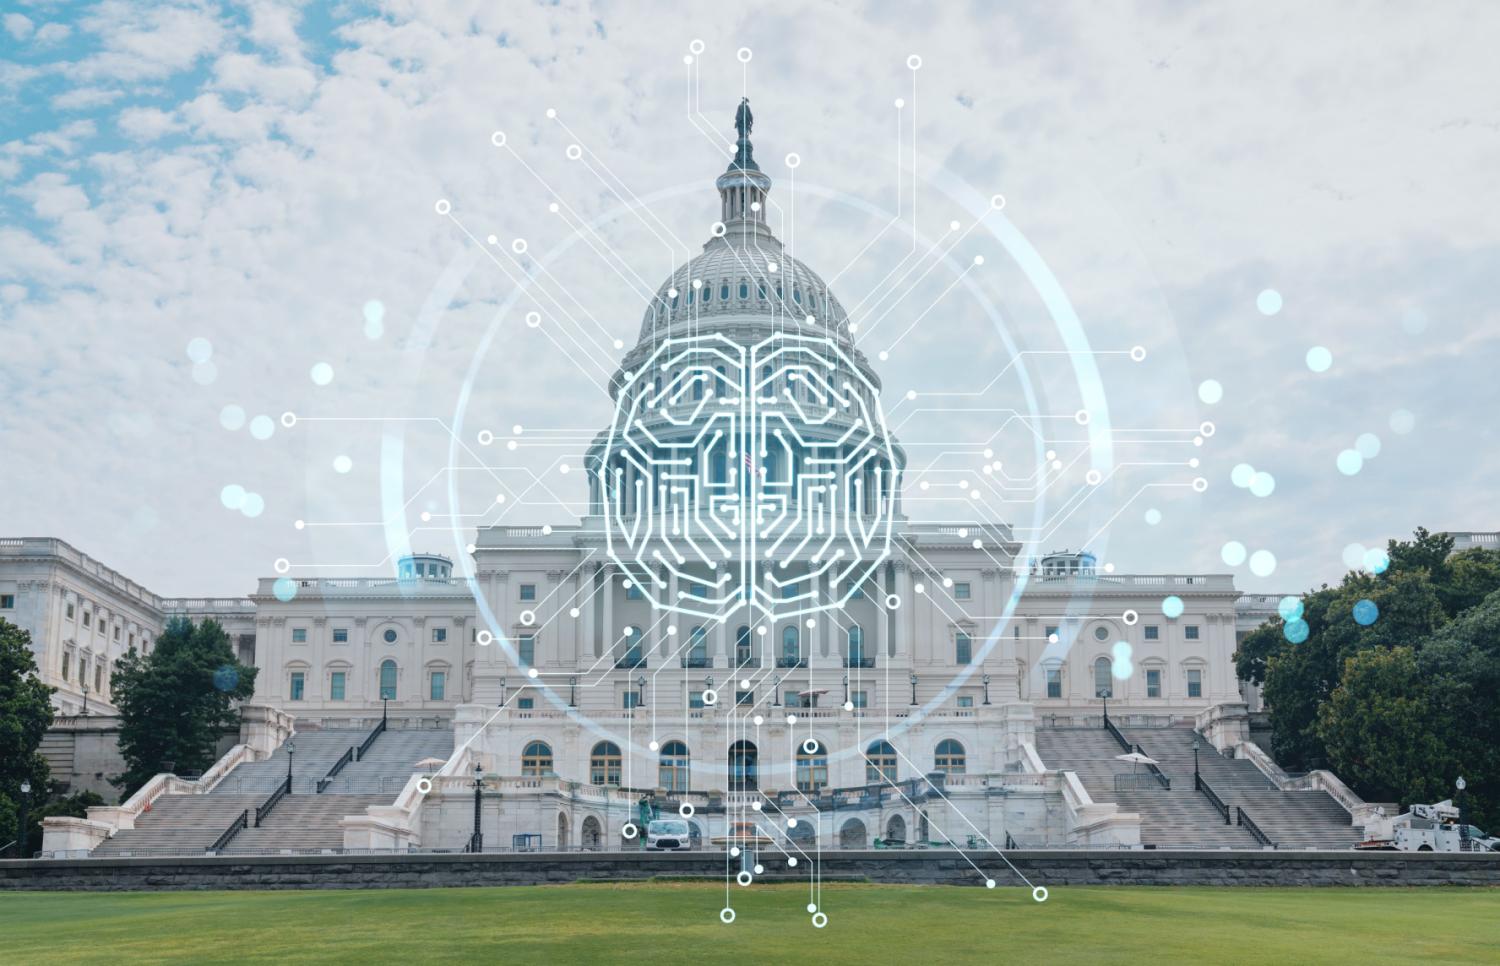 Capitol Dome Building in Washington, D.C. with an overlay of AI hologram imagery.